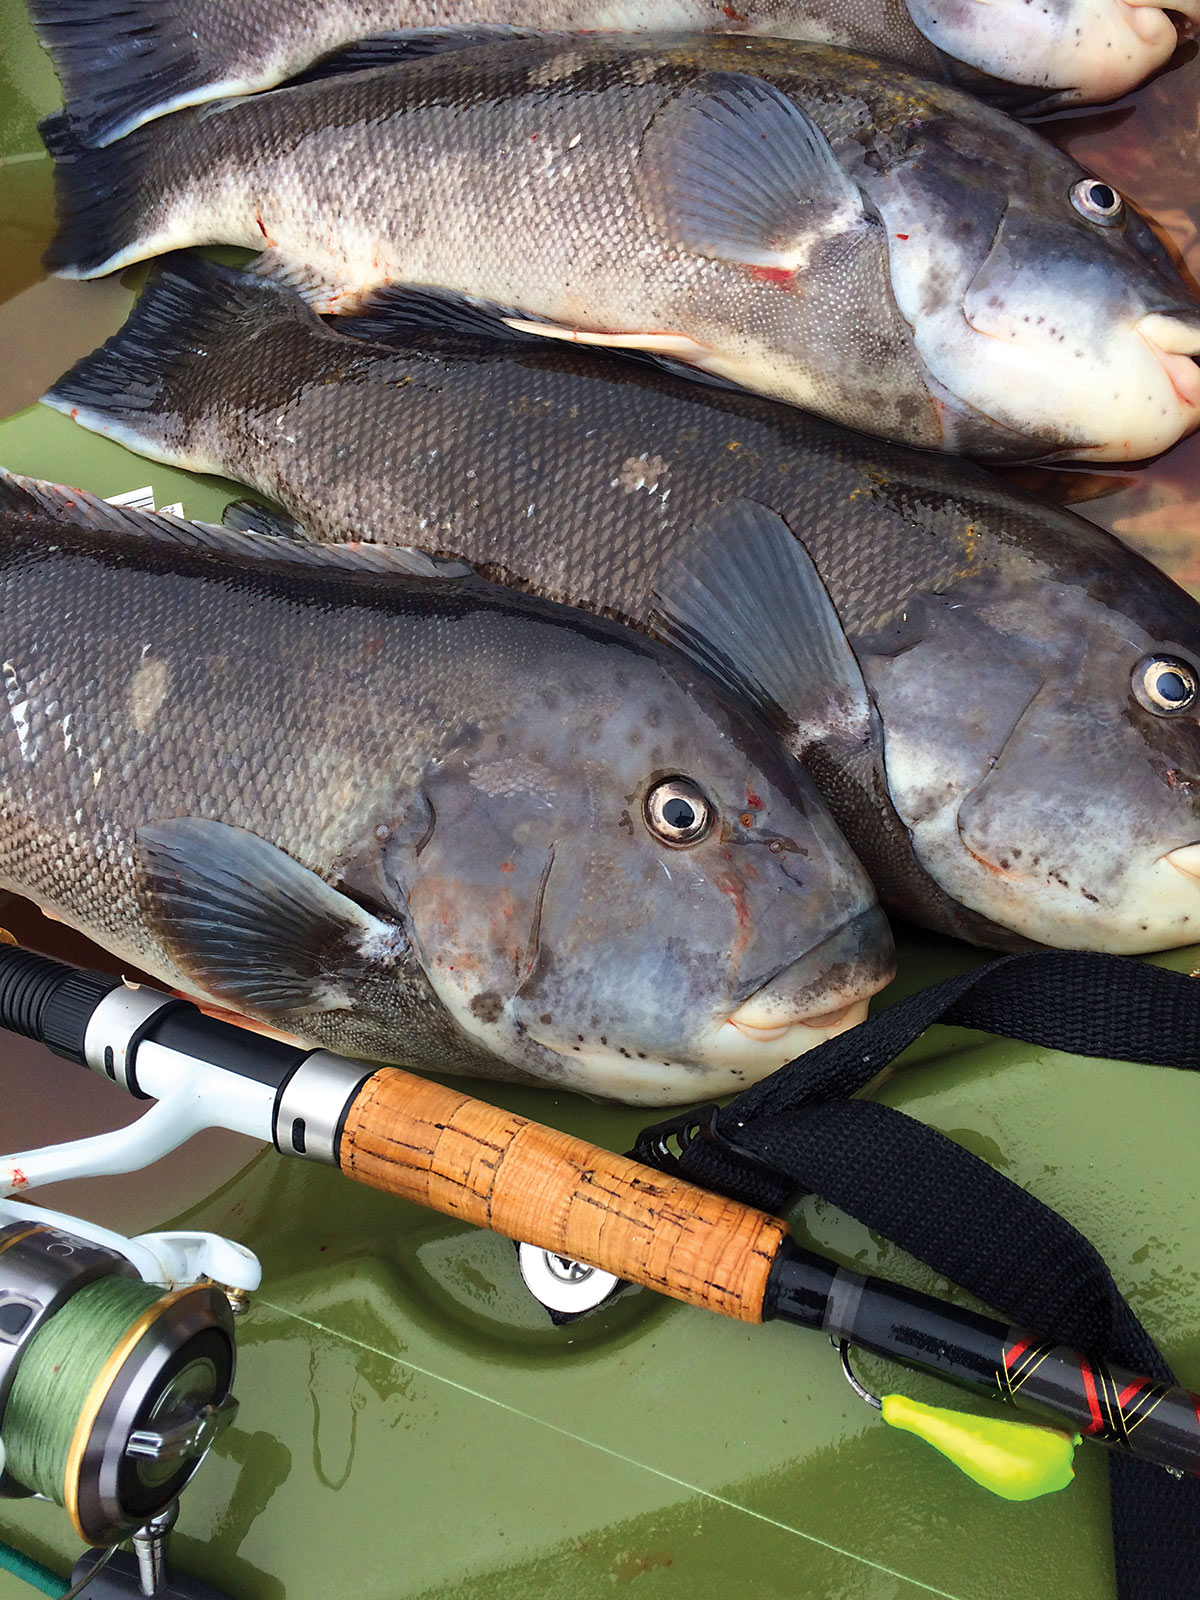 It's time to defrost those reels and gear up for spring fishing